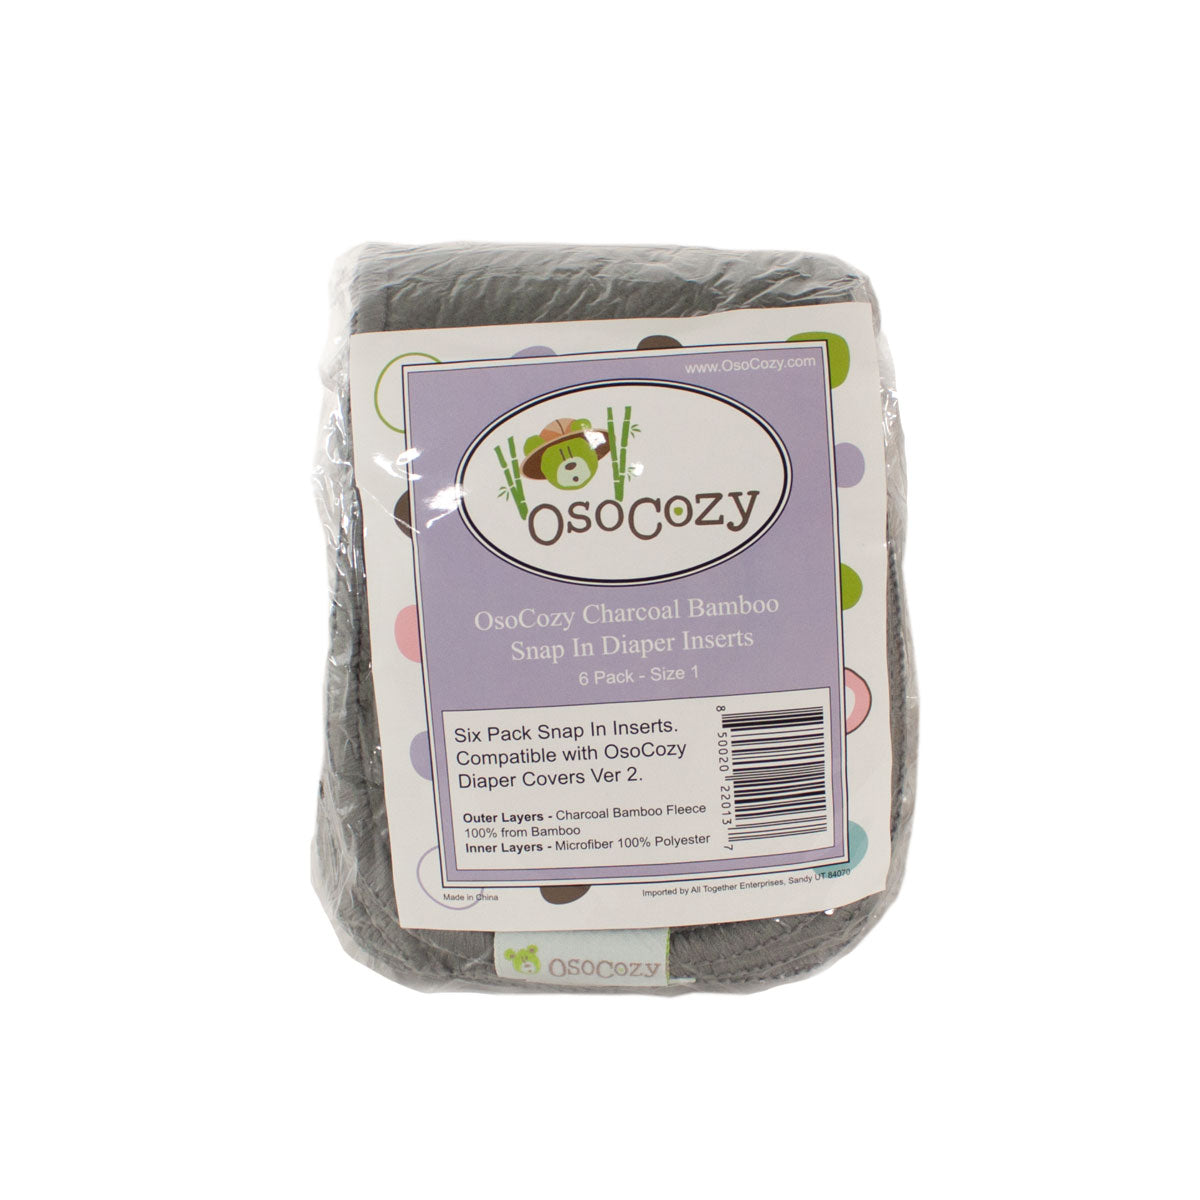 Osocozy Charcoal Bamboo Snap In Diaper Inserts